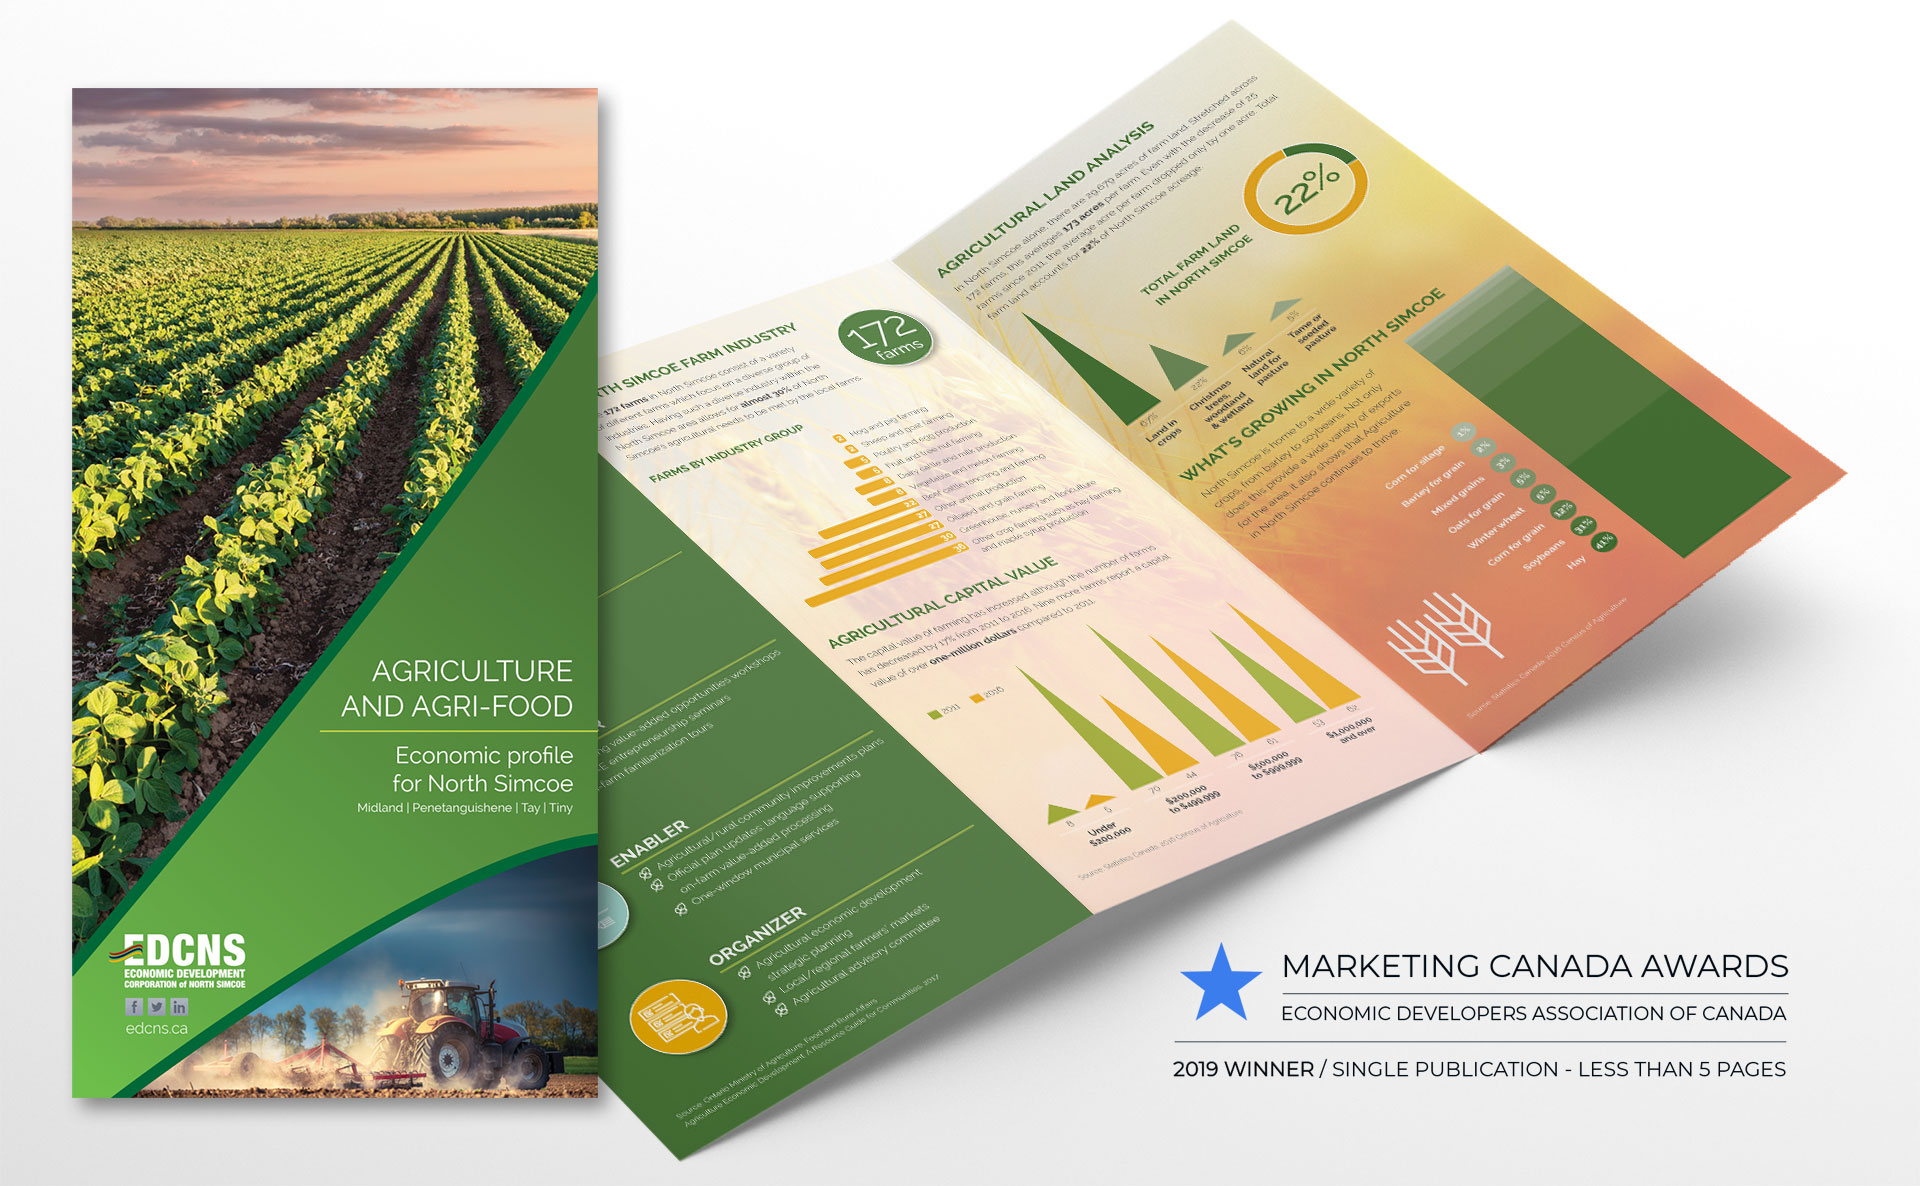 Agriculture and Agri-Food in North Simcoe Brochure